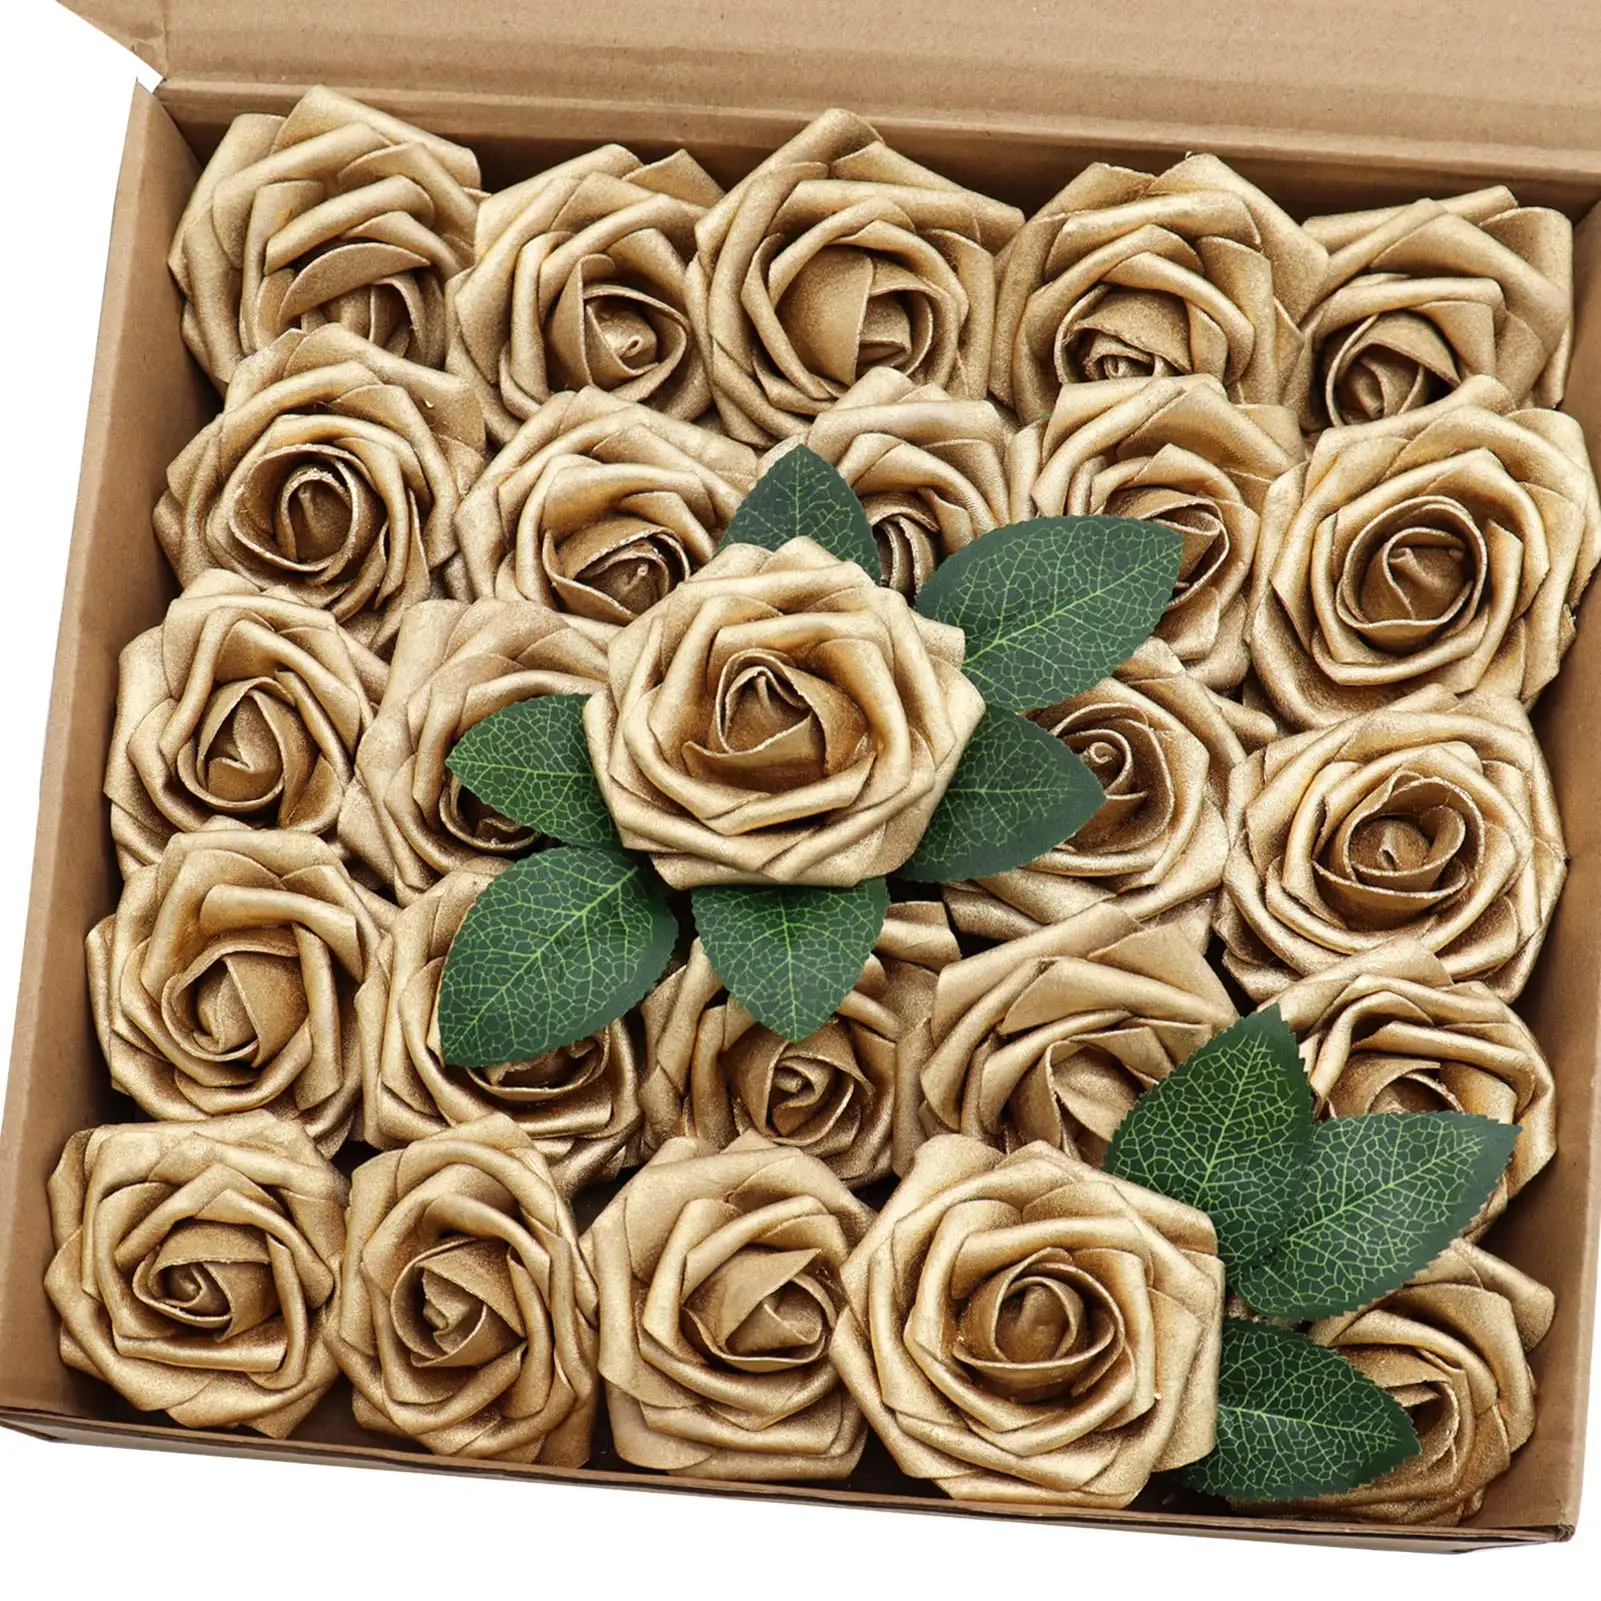 Mefier Home Artificial Flower 25PCS Real Looking Gold Fake Roses with Stem for Christmas Wedding Bouquets Party Home Decoration